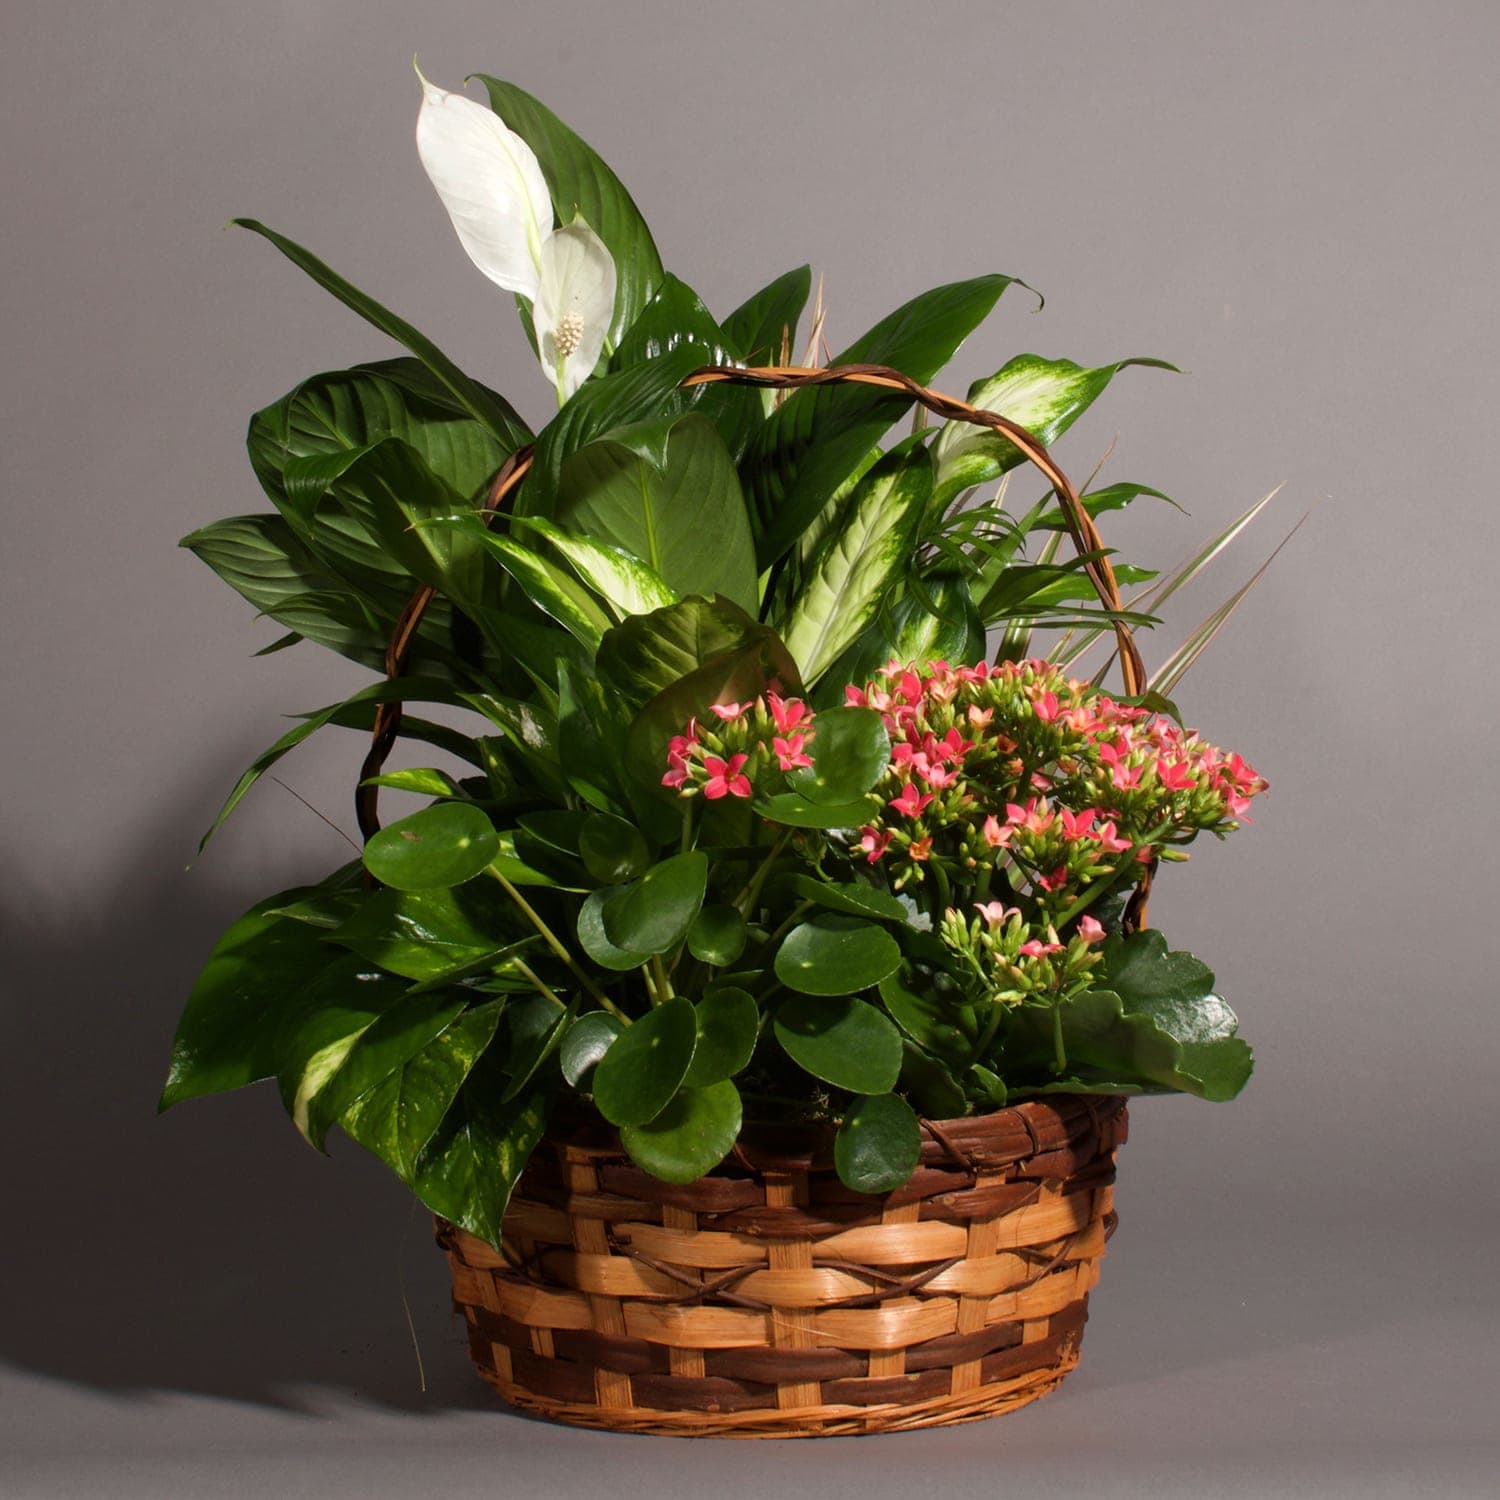 Garden Basket - A basket full of love to the ones you love. A wicker basket with a mix of green and blooming plant.